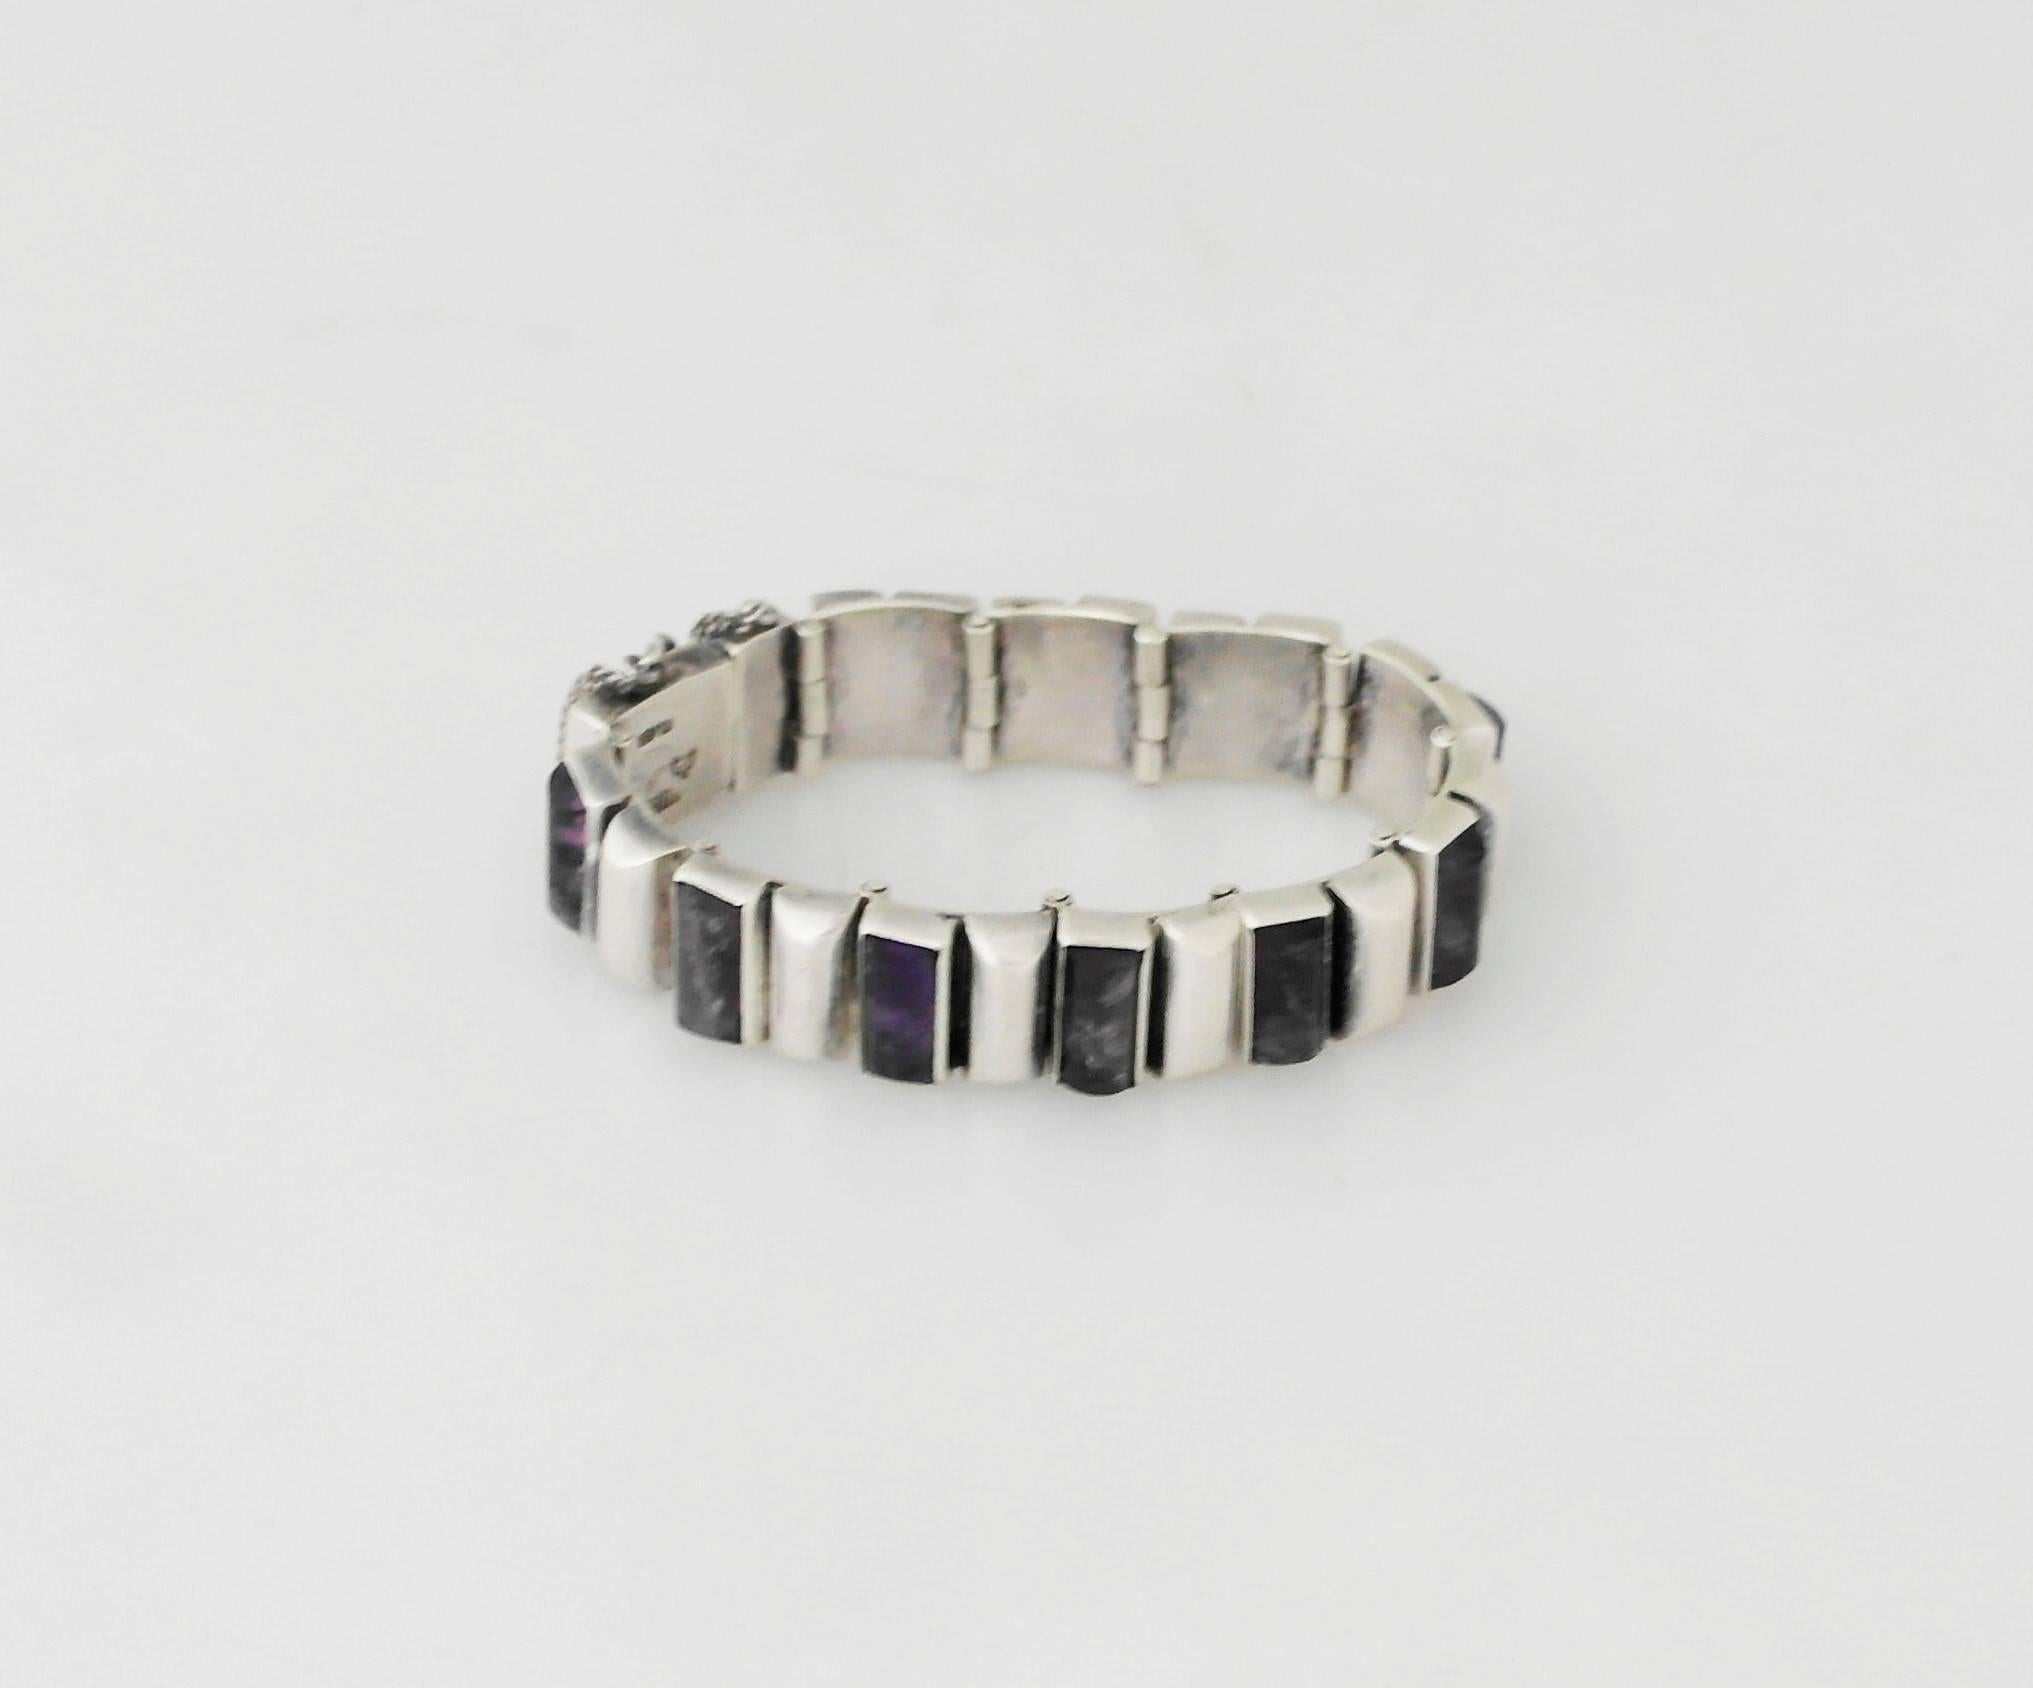 Being offered is a .970 silver link bracelet by Antonio Pineda of Taxco, Mexico; comprising rectangular domed links with alternating bezel set amethyst stones; tongue & box closure; security chain. Dimensions: 1/2